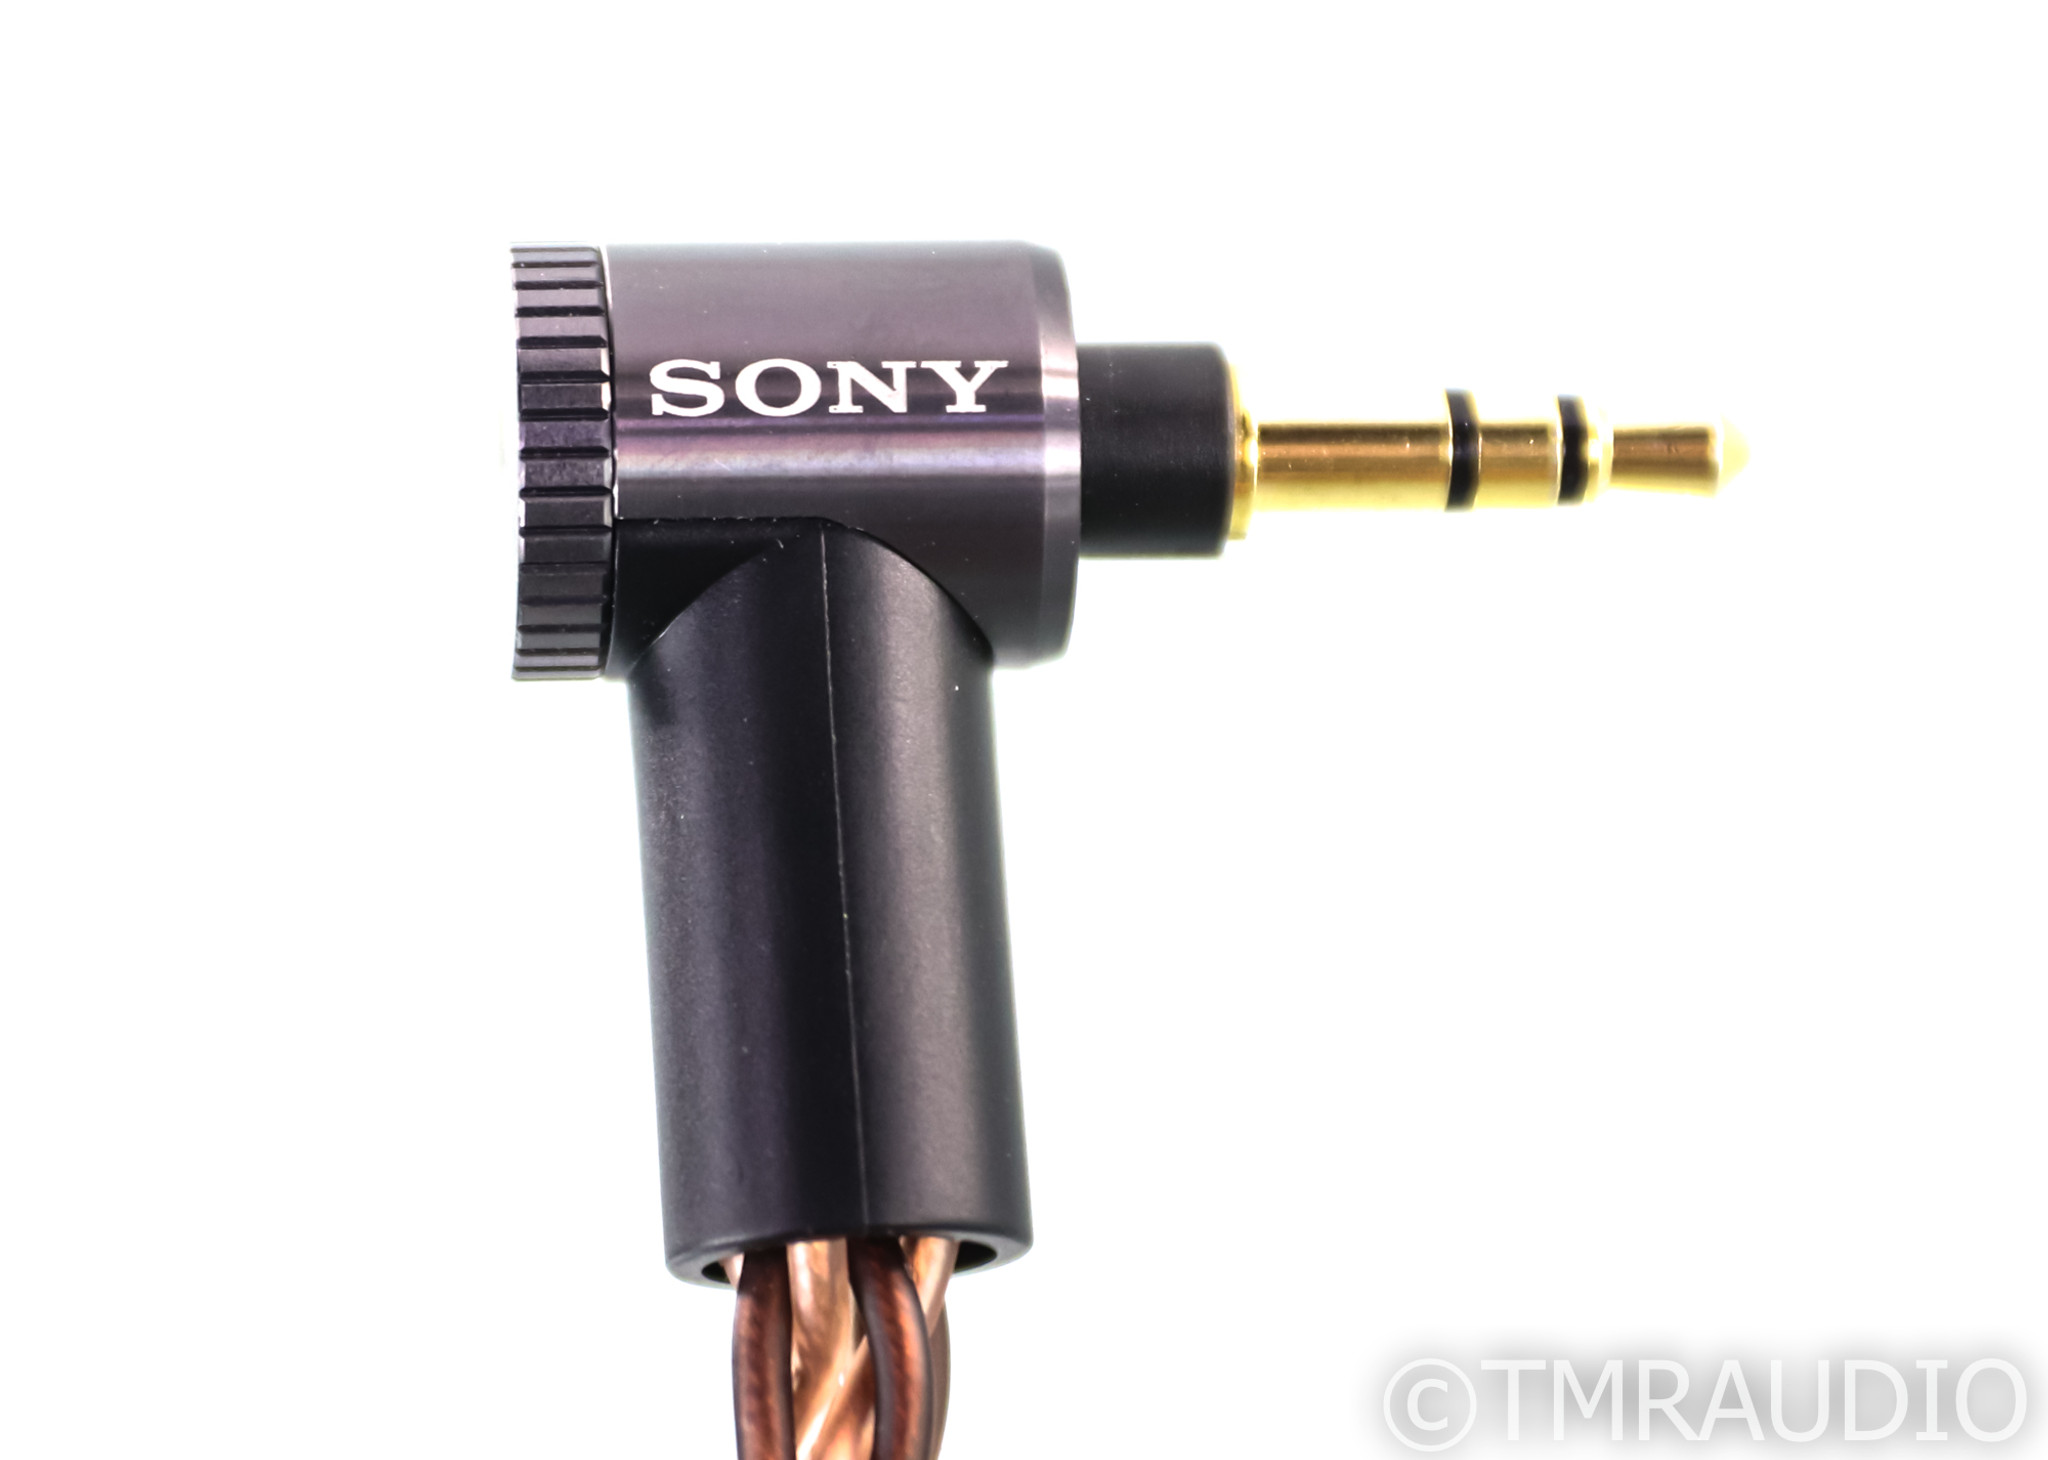 Sony MUC-B12SM1 3.5mm Headphone Cable; 4ft; Kimber Kable; For Sony